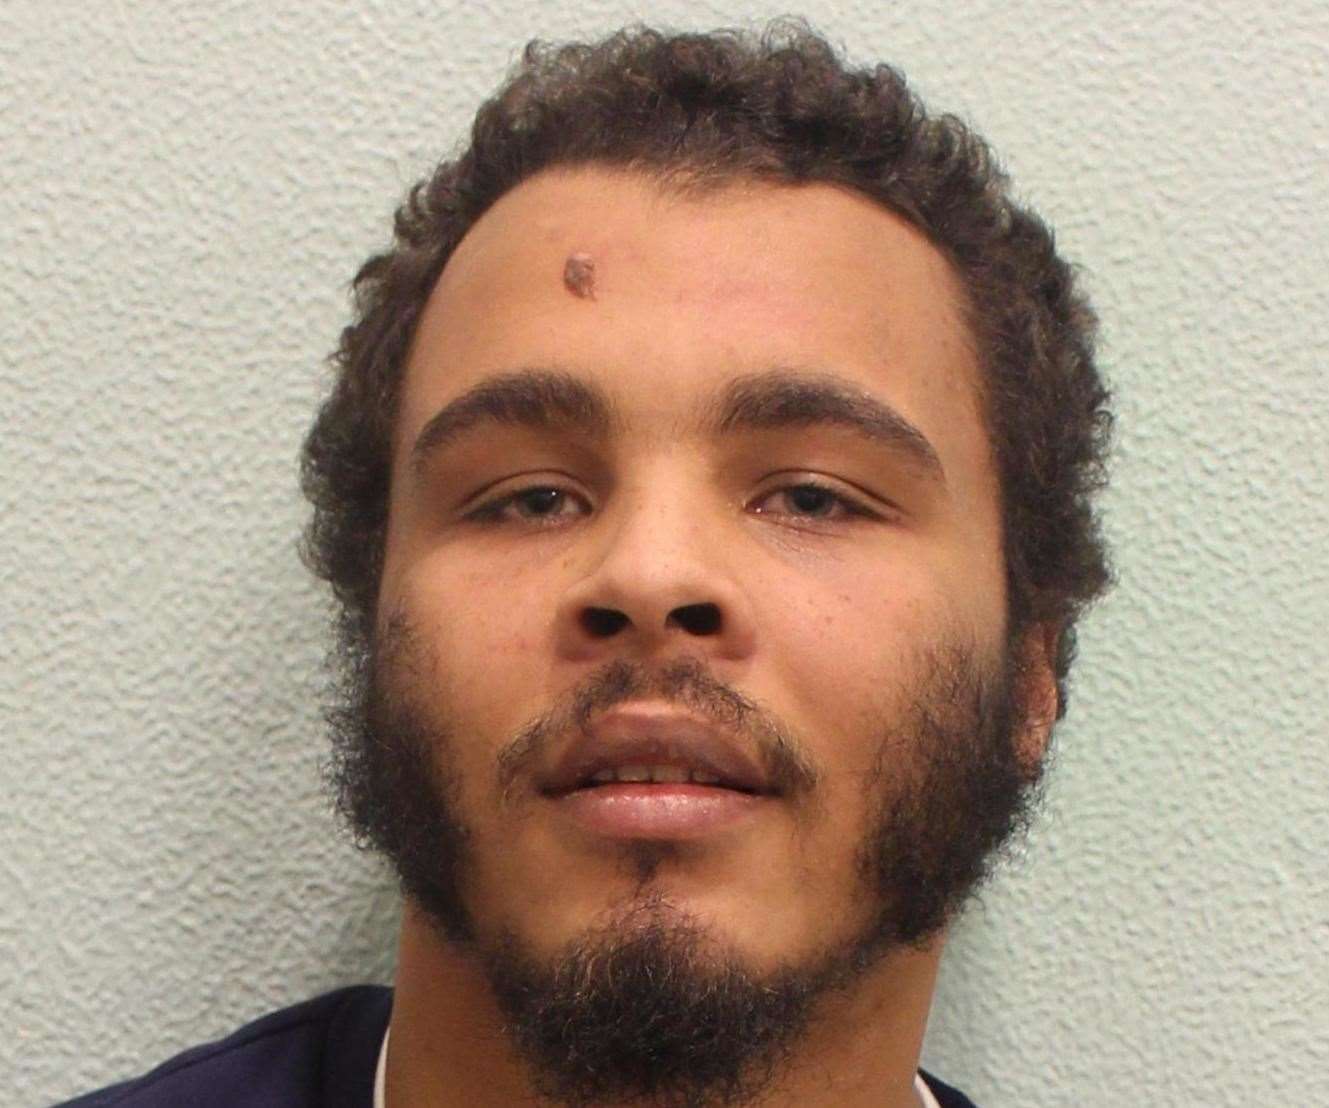 Jordan Bailey-Mascoll, 25, was convicted of murdering Bromley father Danny Pearce